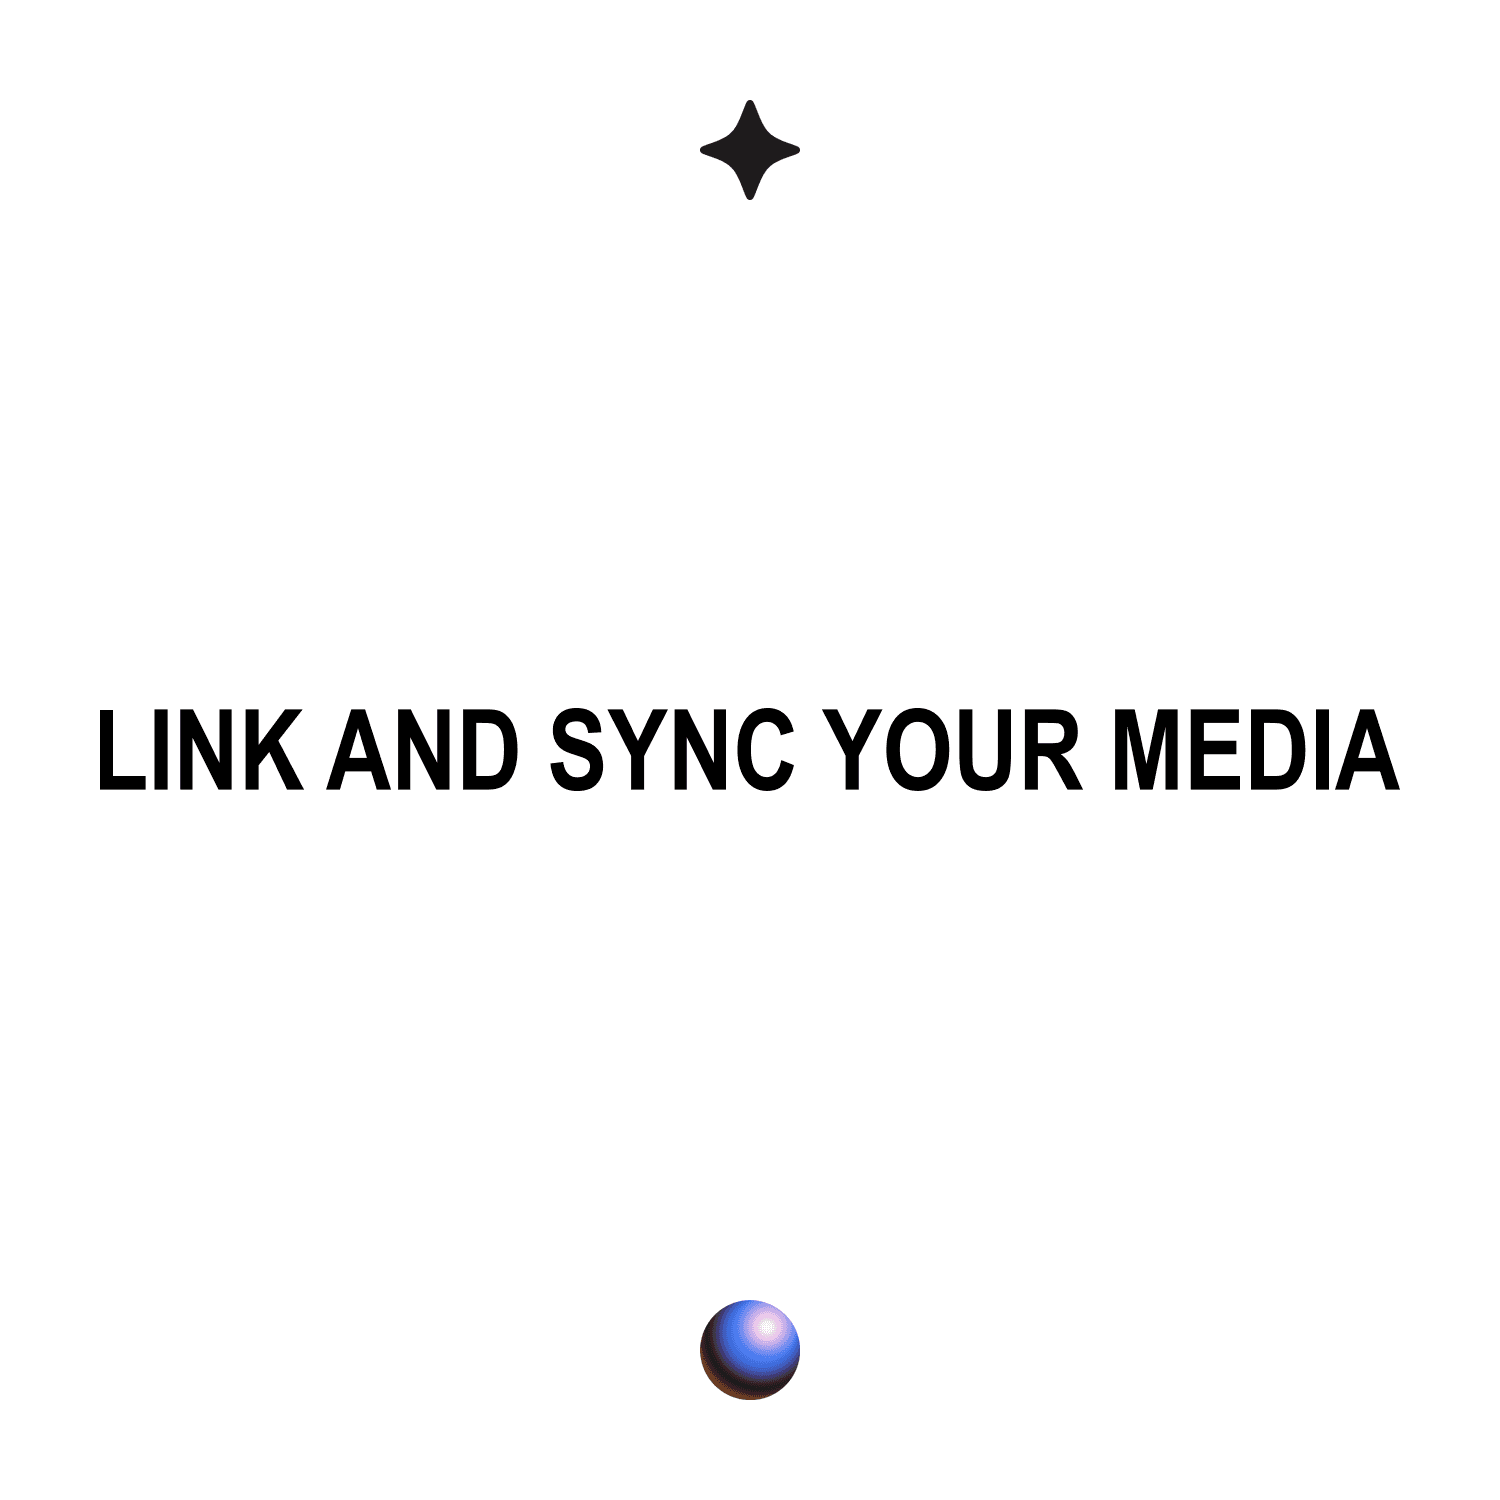 LINK AND SYNC YOUR MEDIA